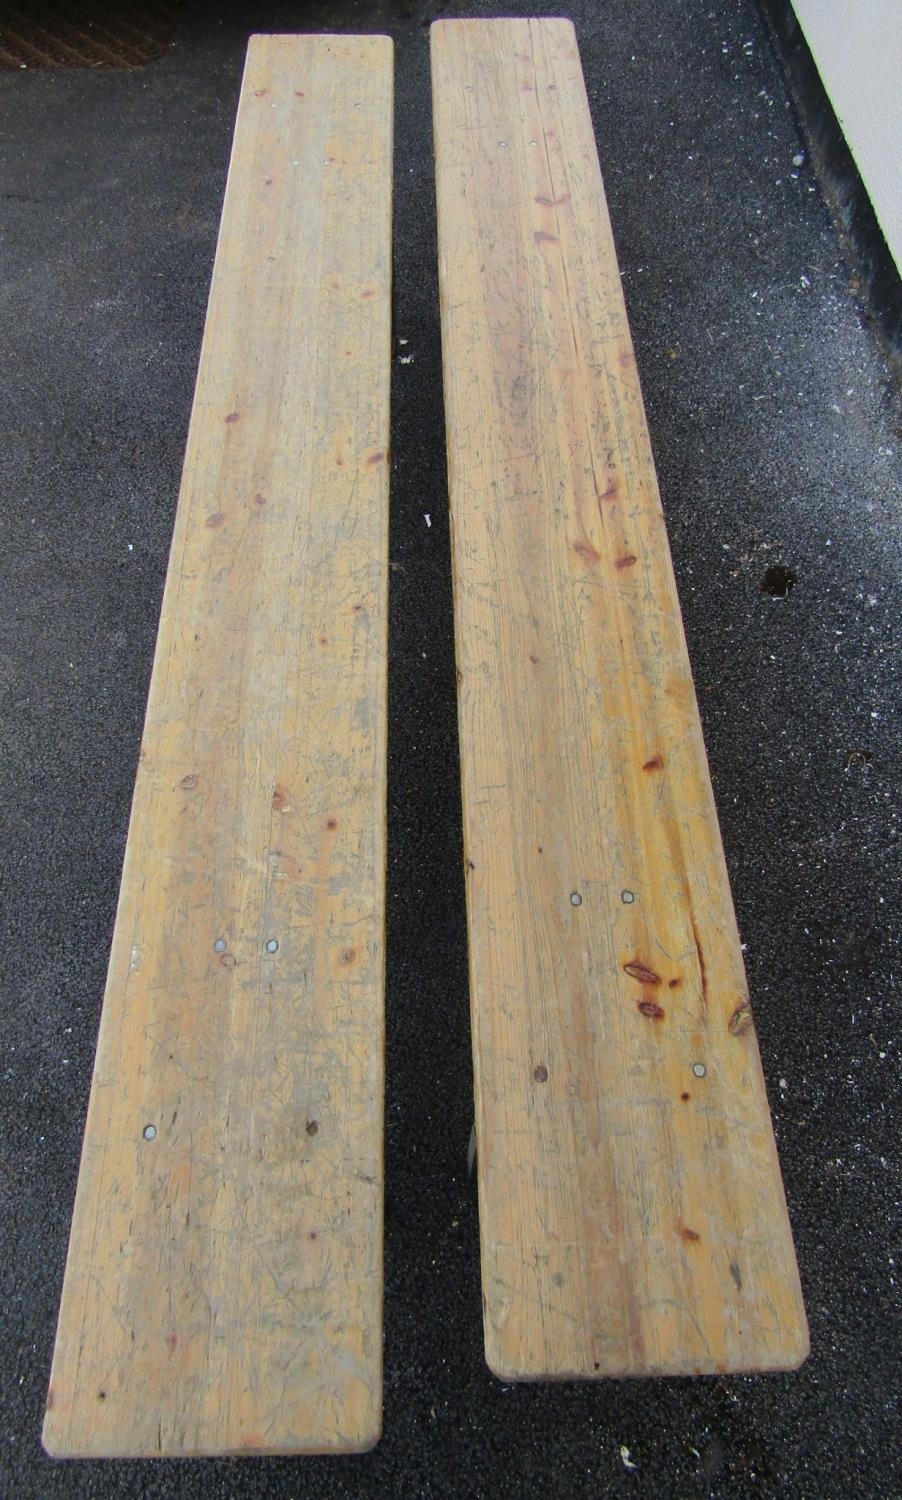 A pair of folding trestle benches with wooden plank seats and folding iron supports, 2 metres long x